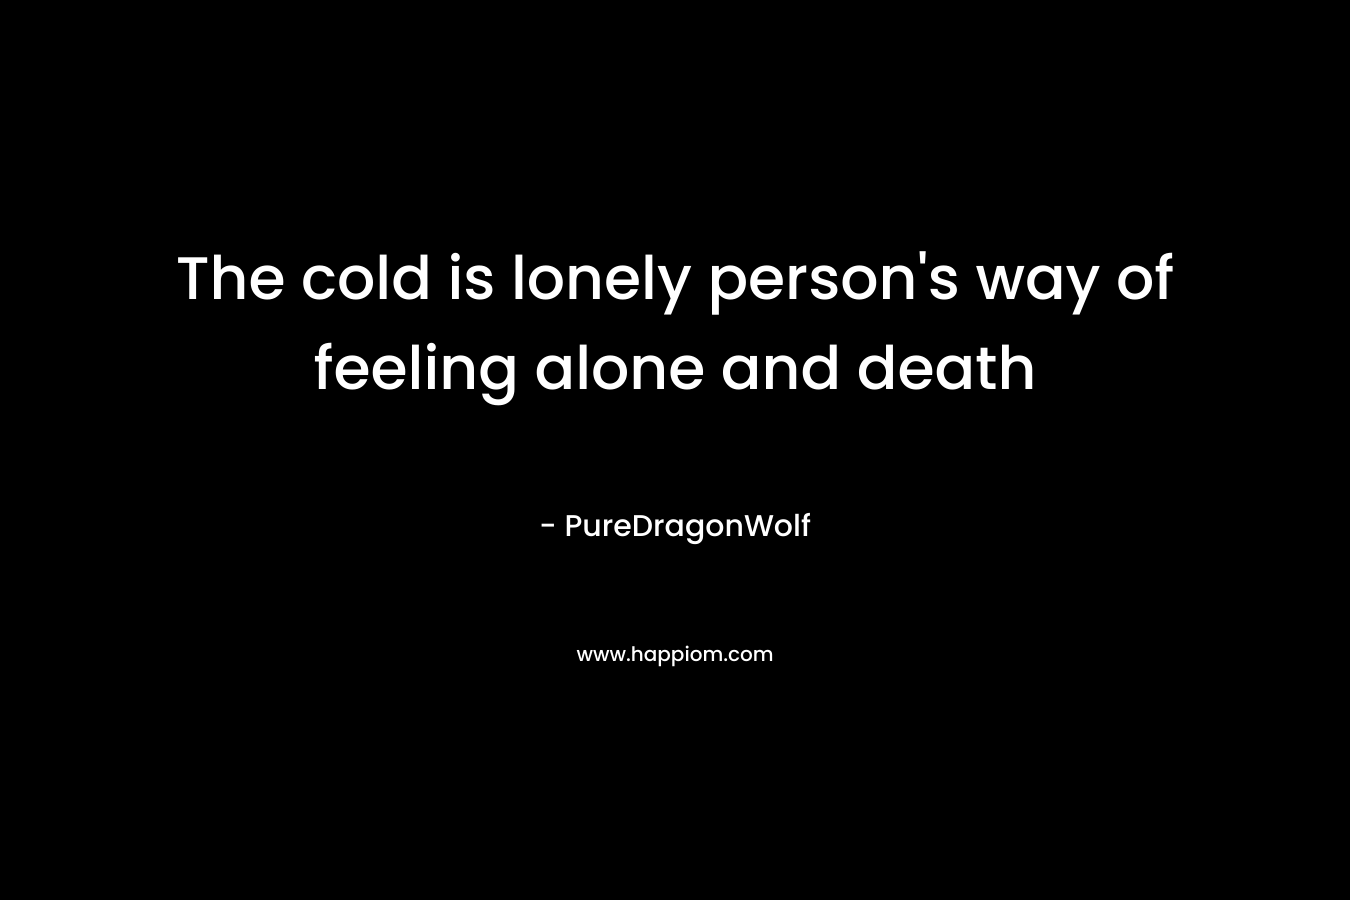 The cold is lonely person’s way of feeling alone and death – PureDragonWolf